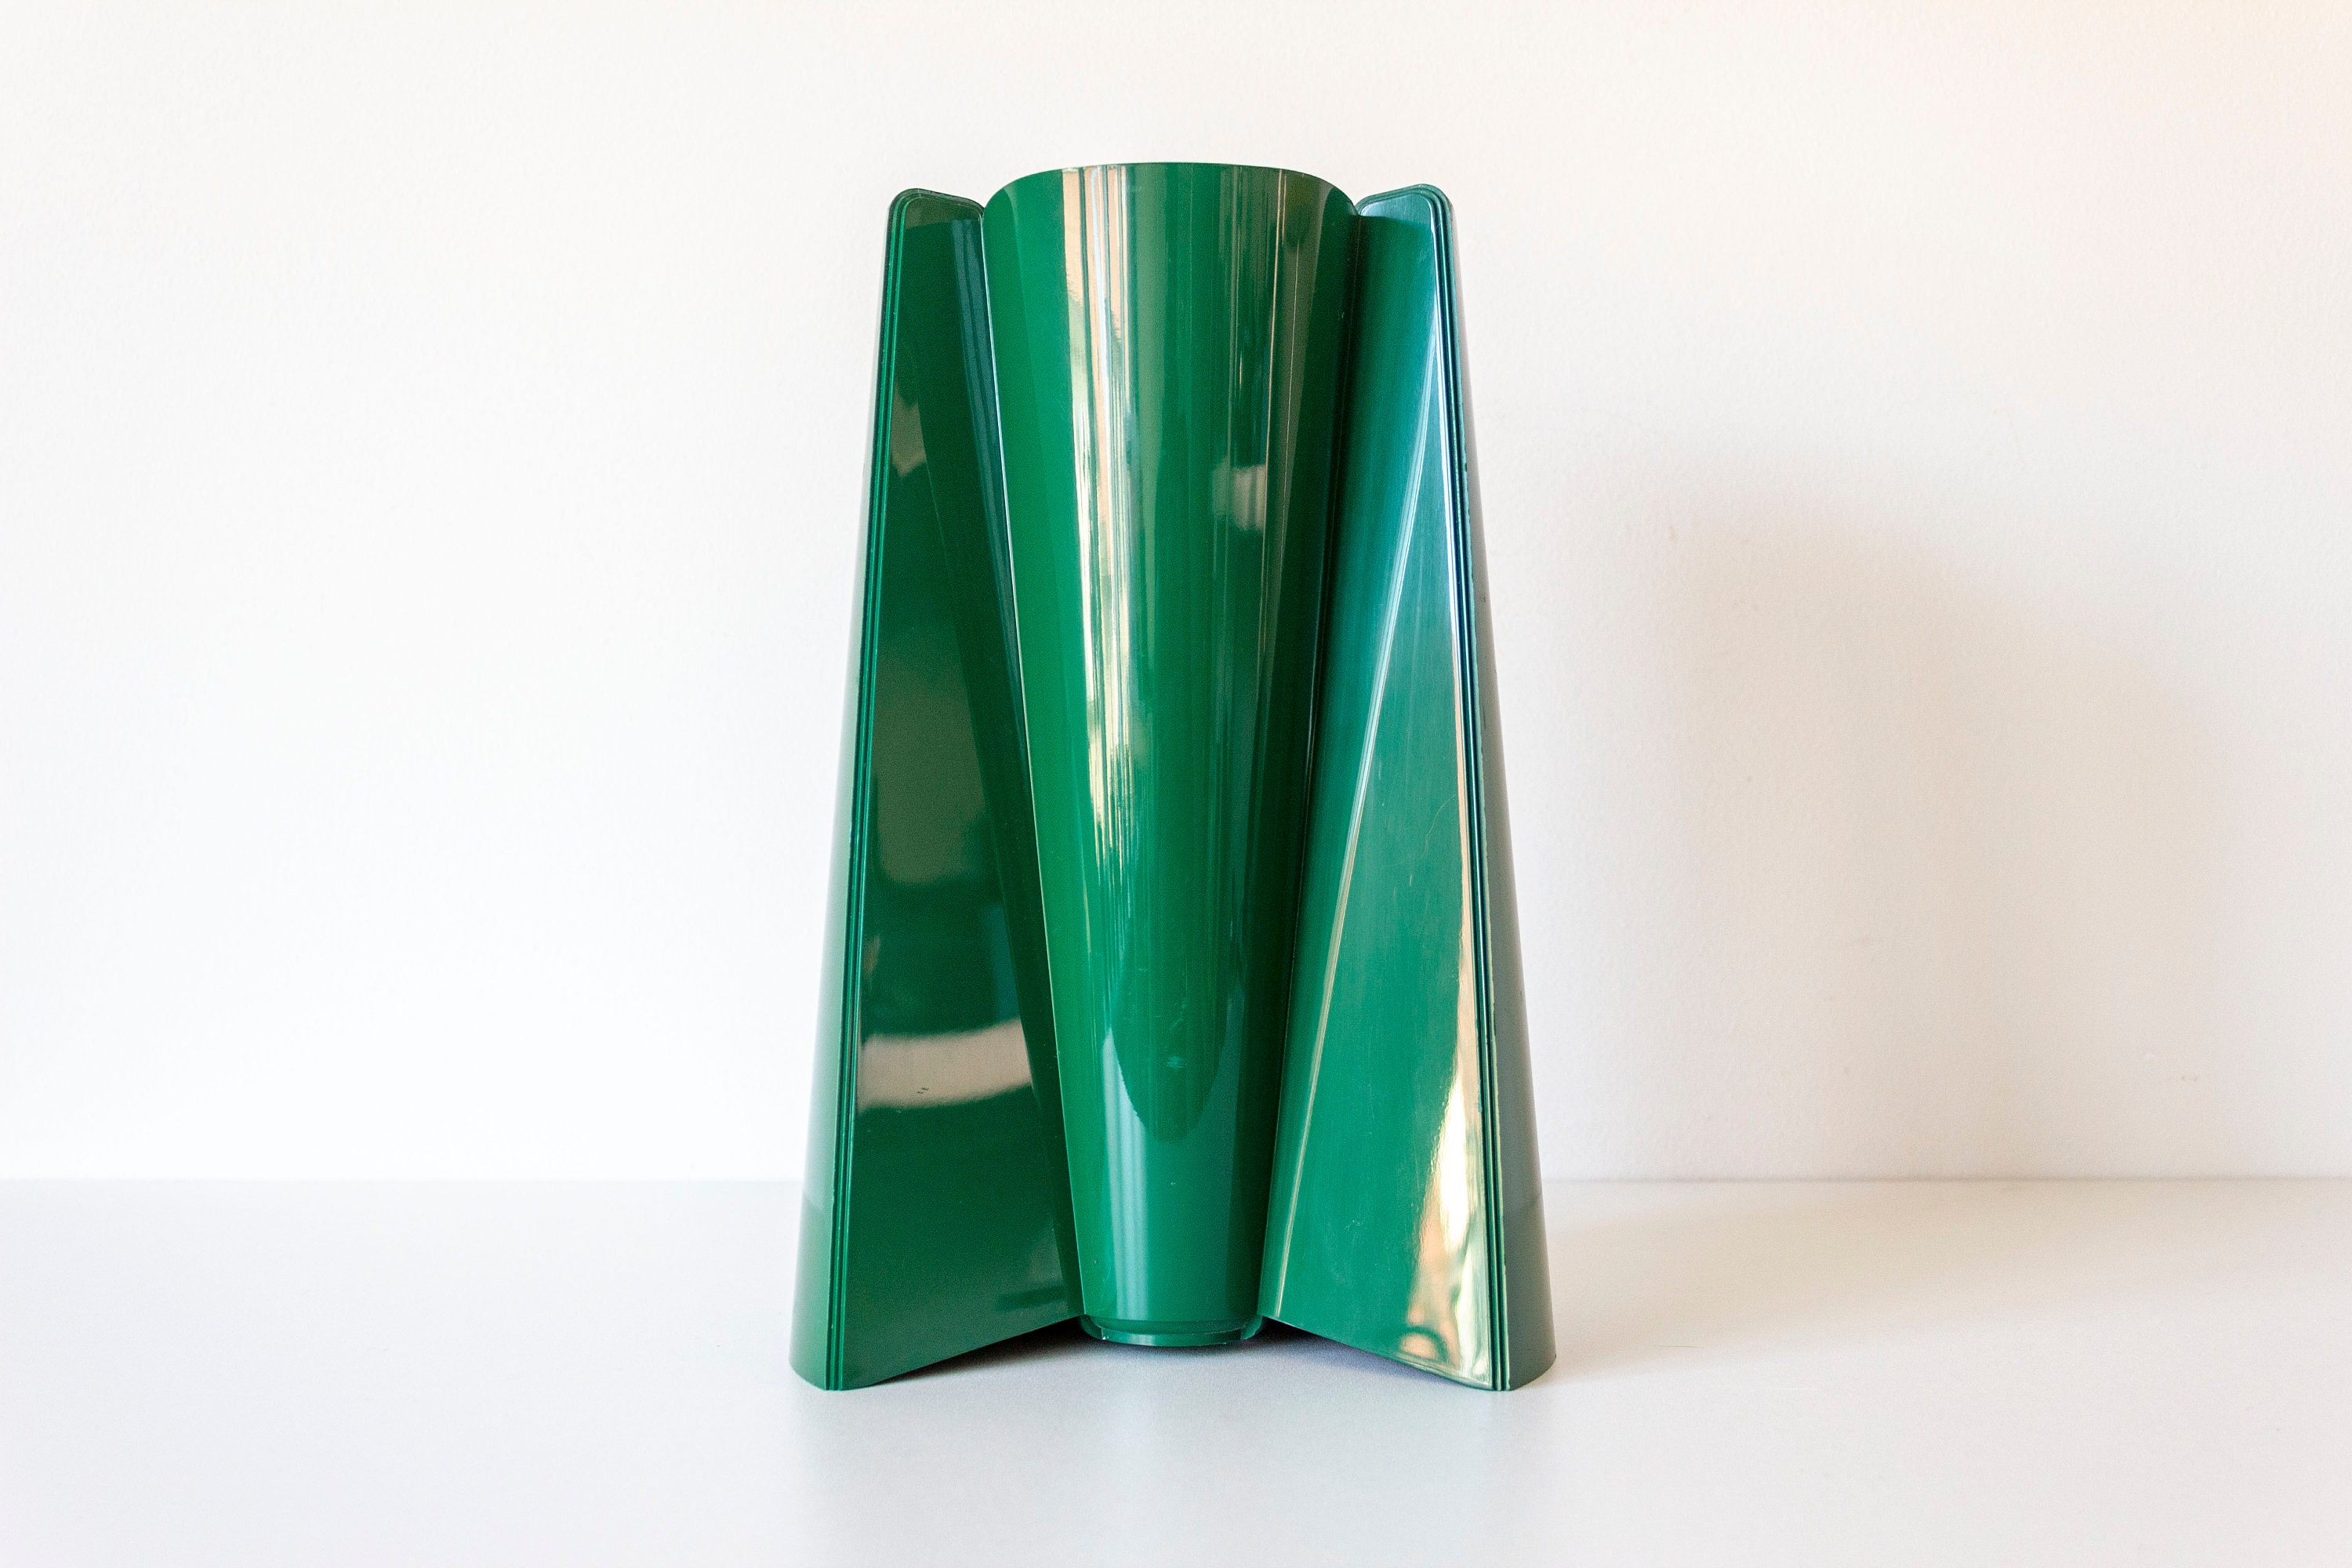 Green Pago Pago Vase by Enzo Mari for Danese 1969 alessi - Etsy